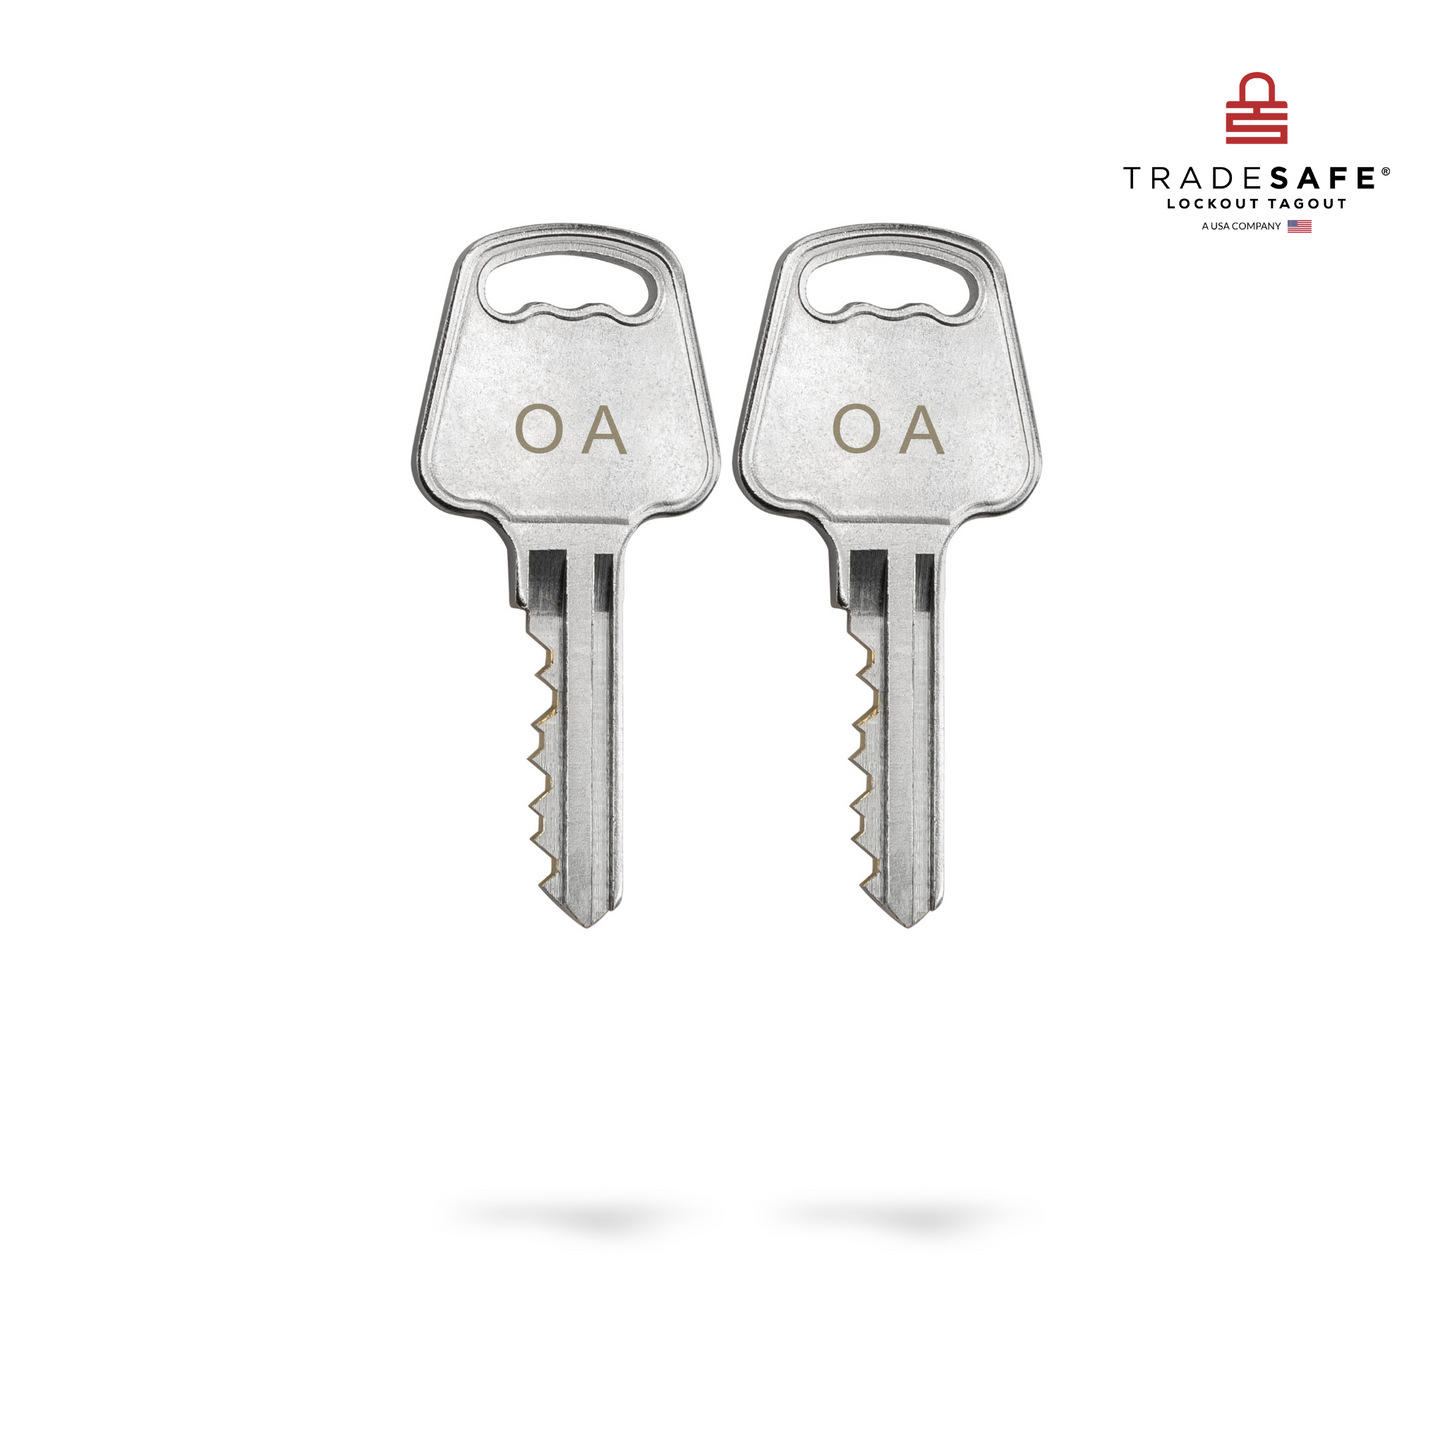 two keys, each with the letter code OA 